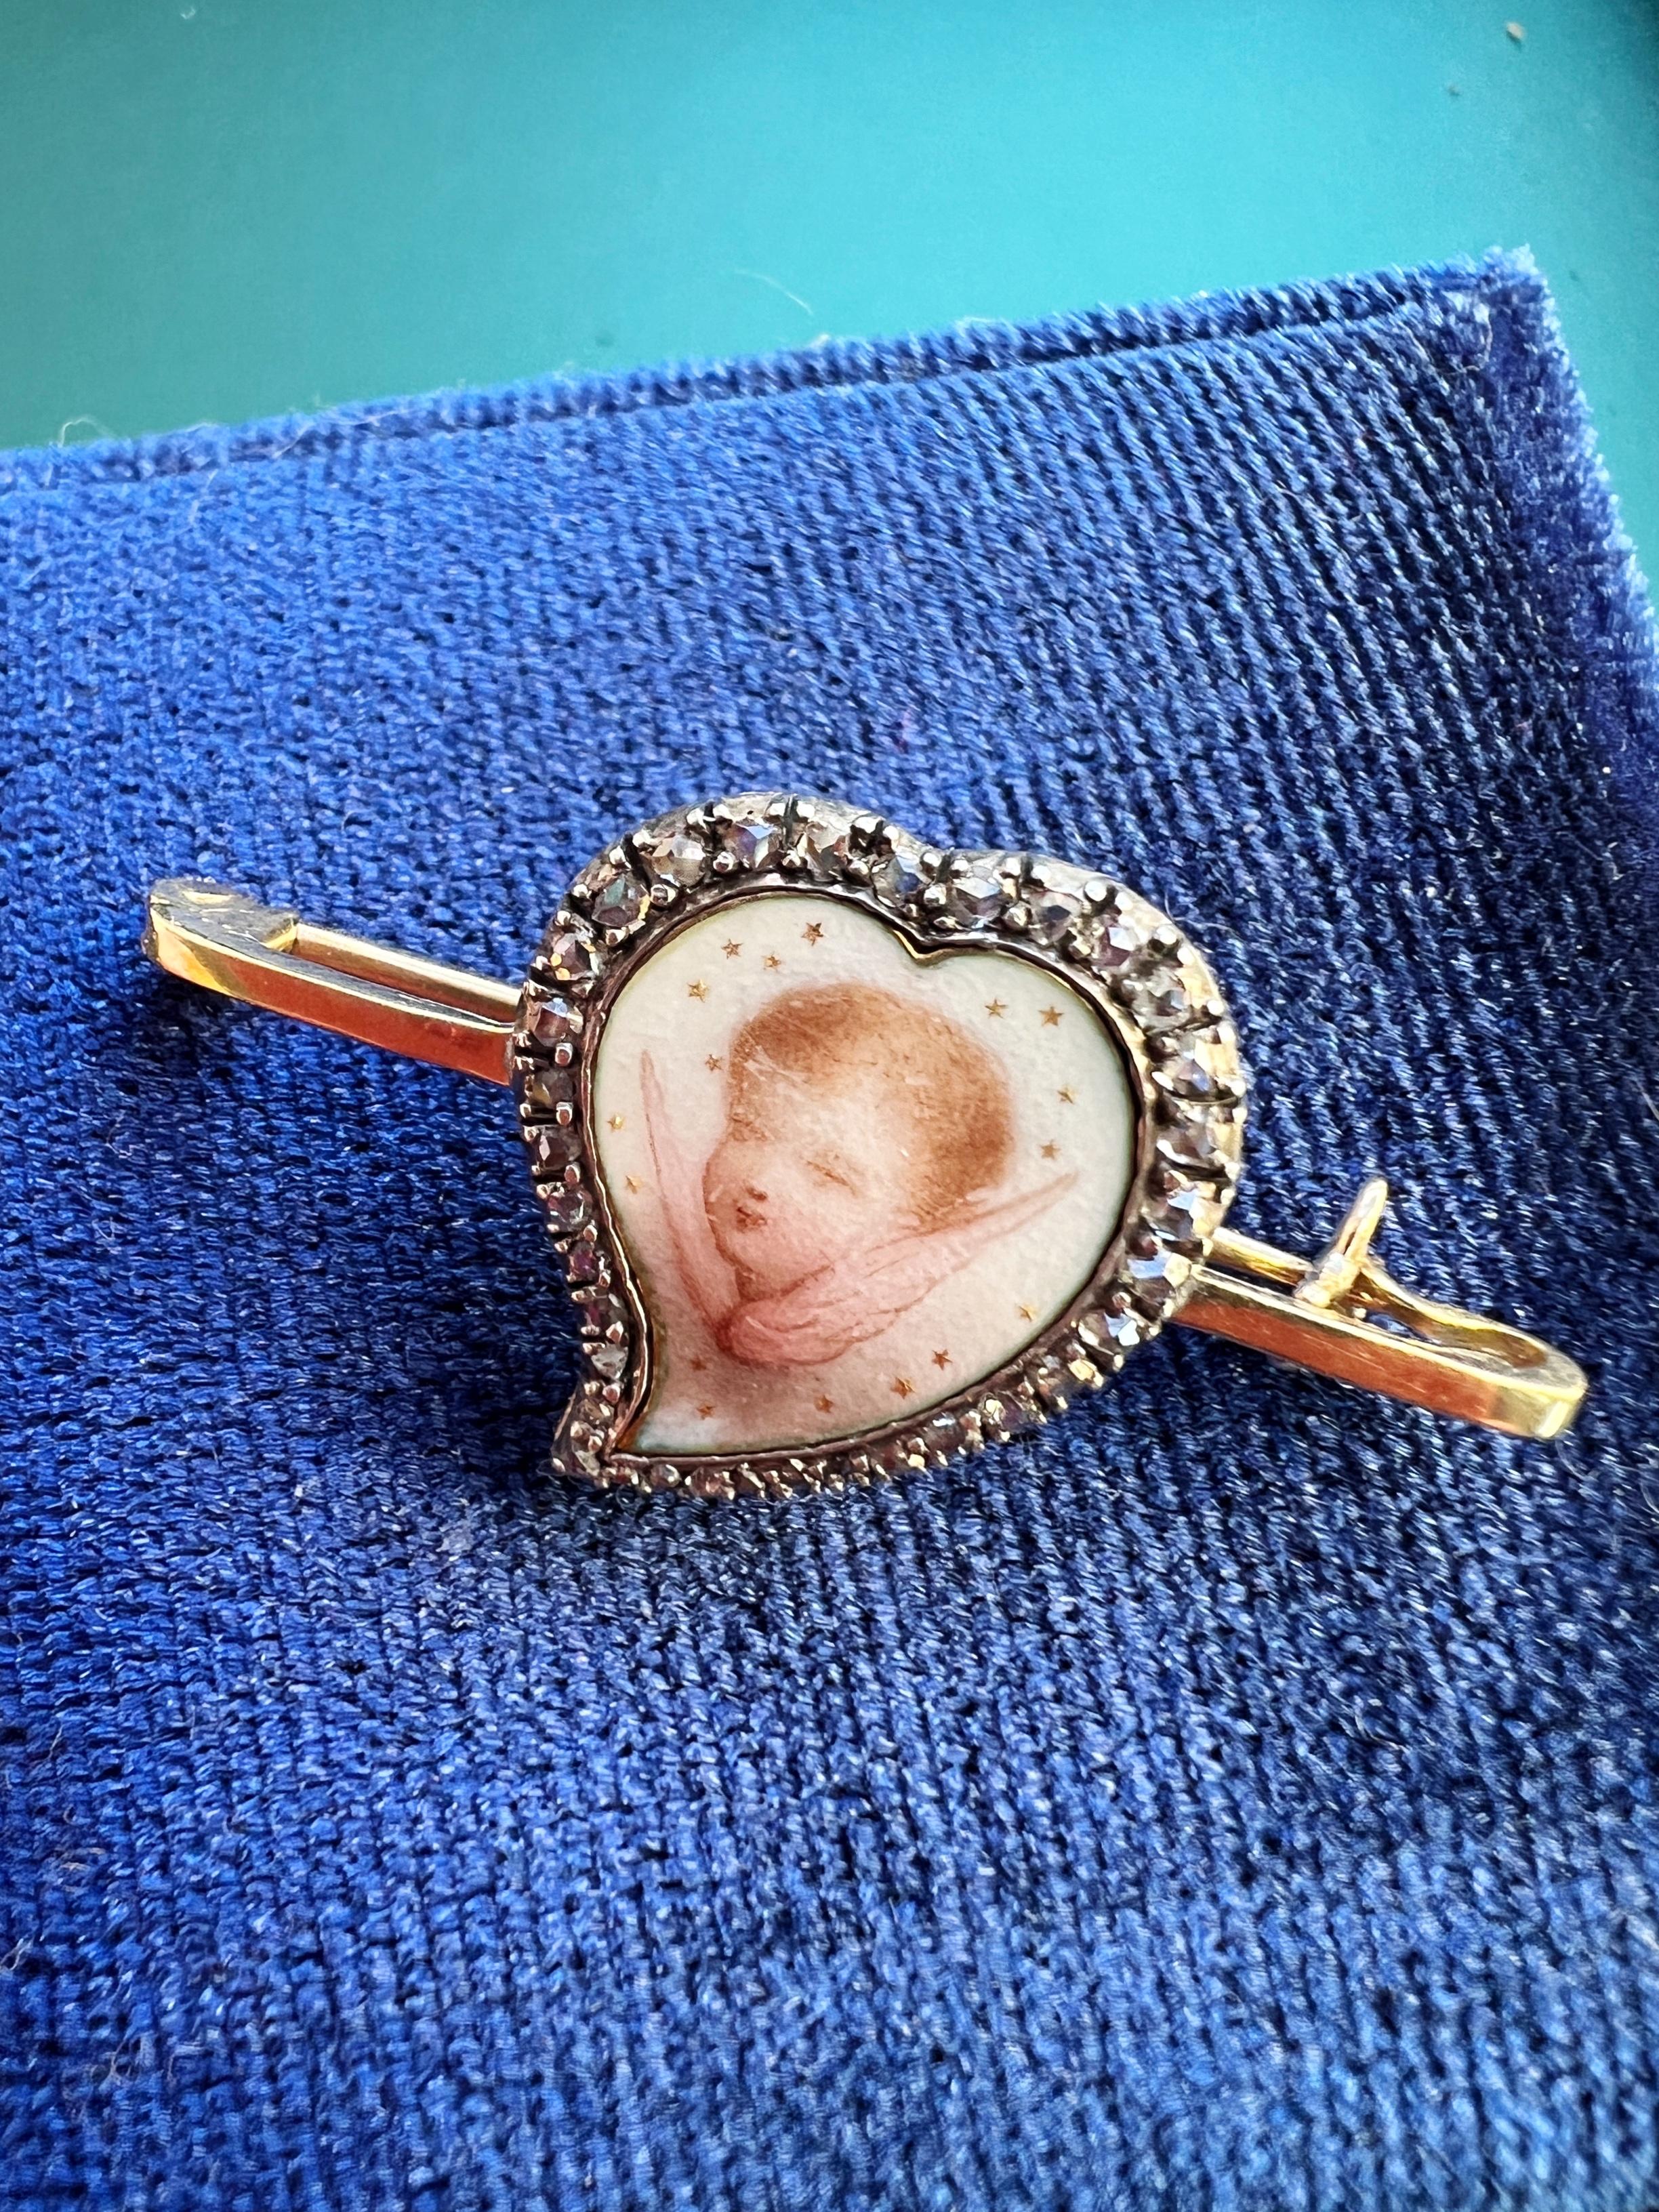 Very often used as the emotional connections in one’s life, jewelry with angels commemorates love, birth, friendship and mourning. Angels, or cherubs are the most beloved winged creatures throughout the history.

For sale a lovely brooch dated back